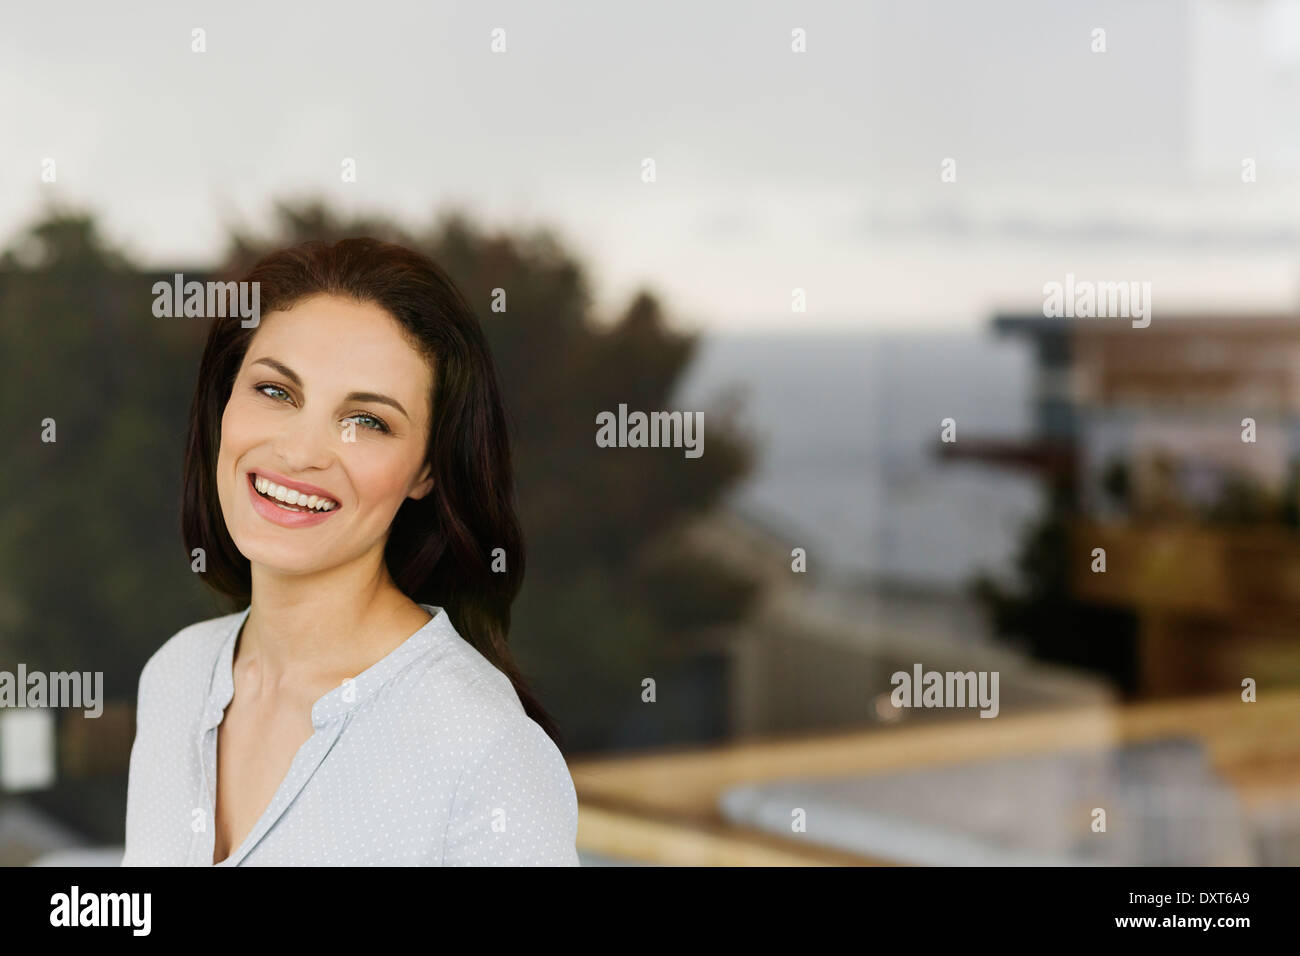 Portrait of woman laughing at window Stock Photo